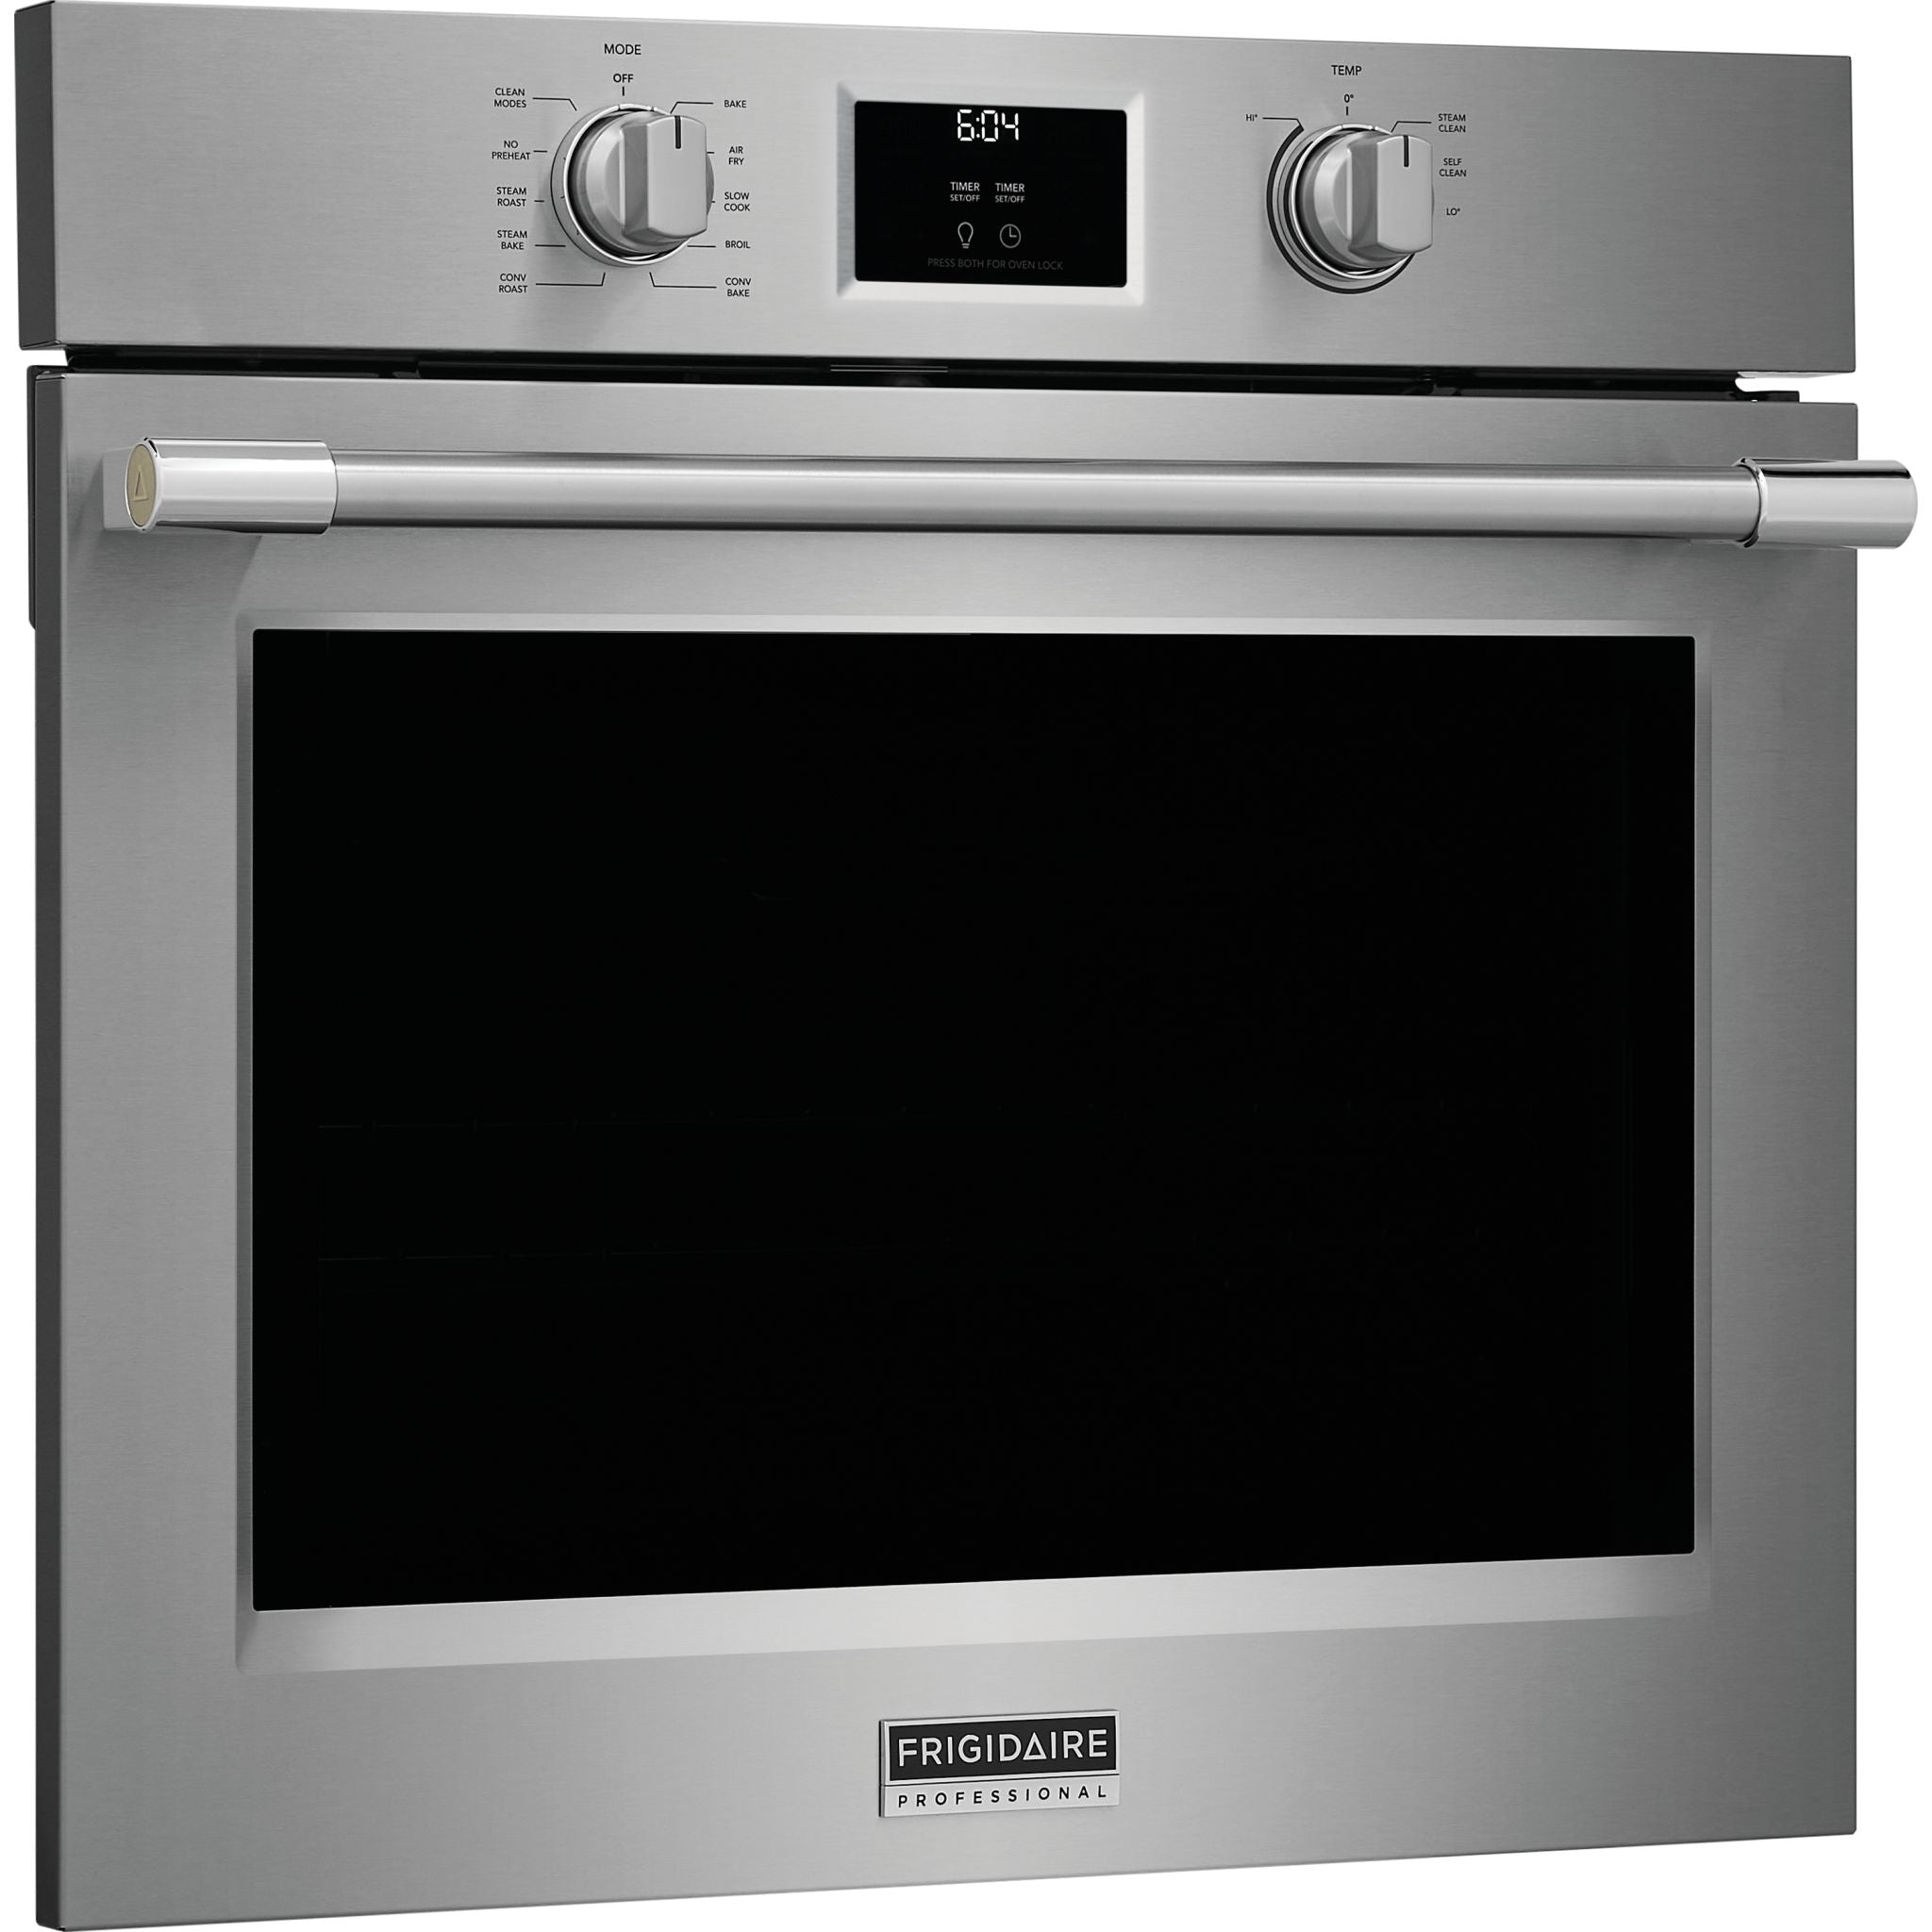 Frigidaire Professional, Frigidaire Professional 30" True Convection Wall Oven (PCWS3080AF) - Stainless Steel